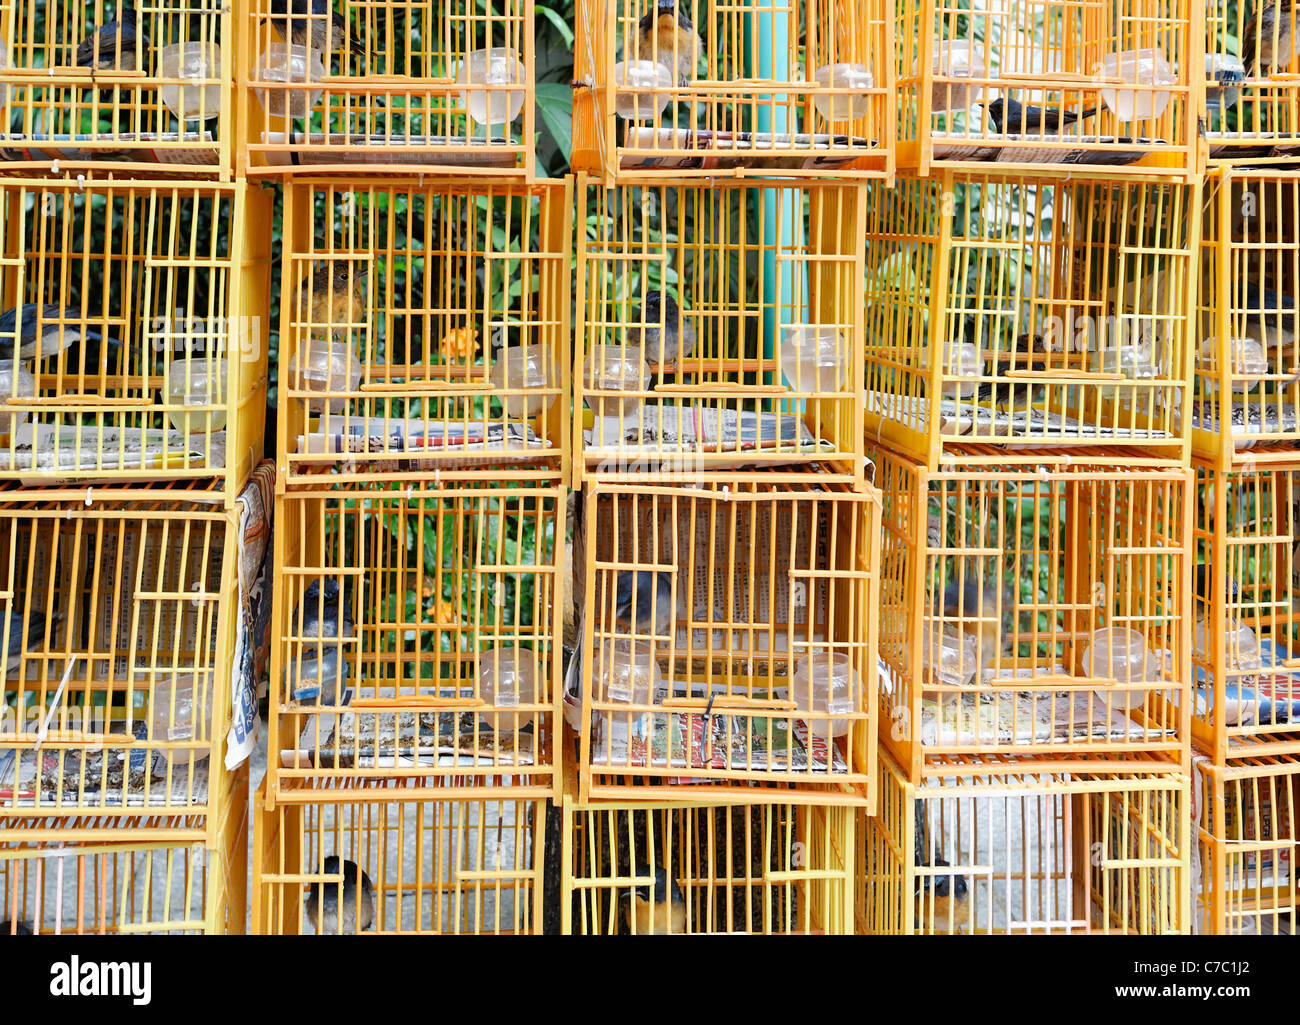 Songbirds in bird cages for sale in Yuen Po Street Bird Garden, Kowloon, Hong Kong SAR, People's Republic of China, Asia Stock Photo